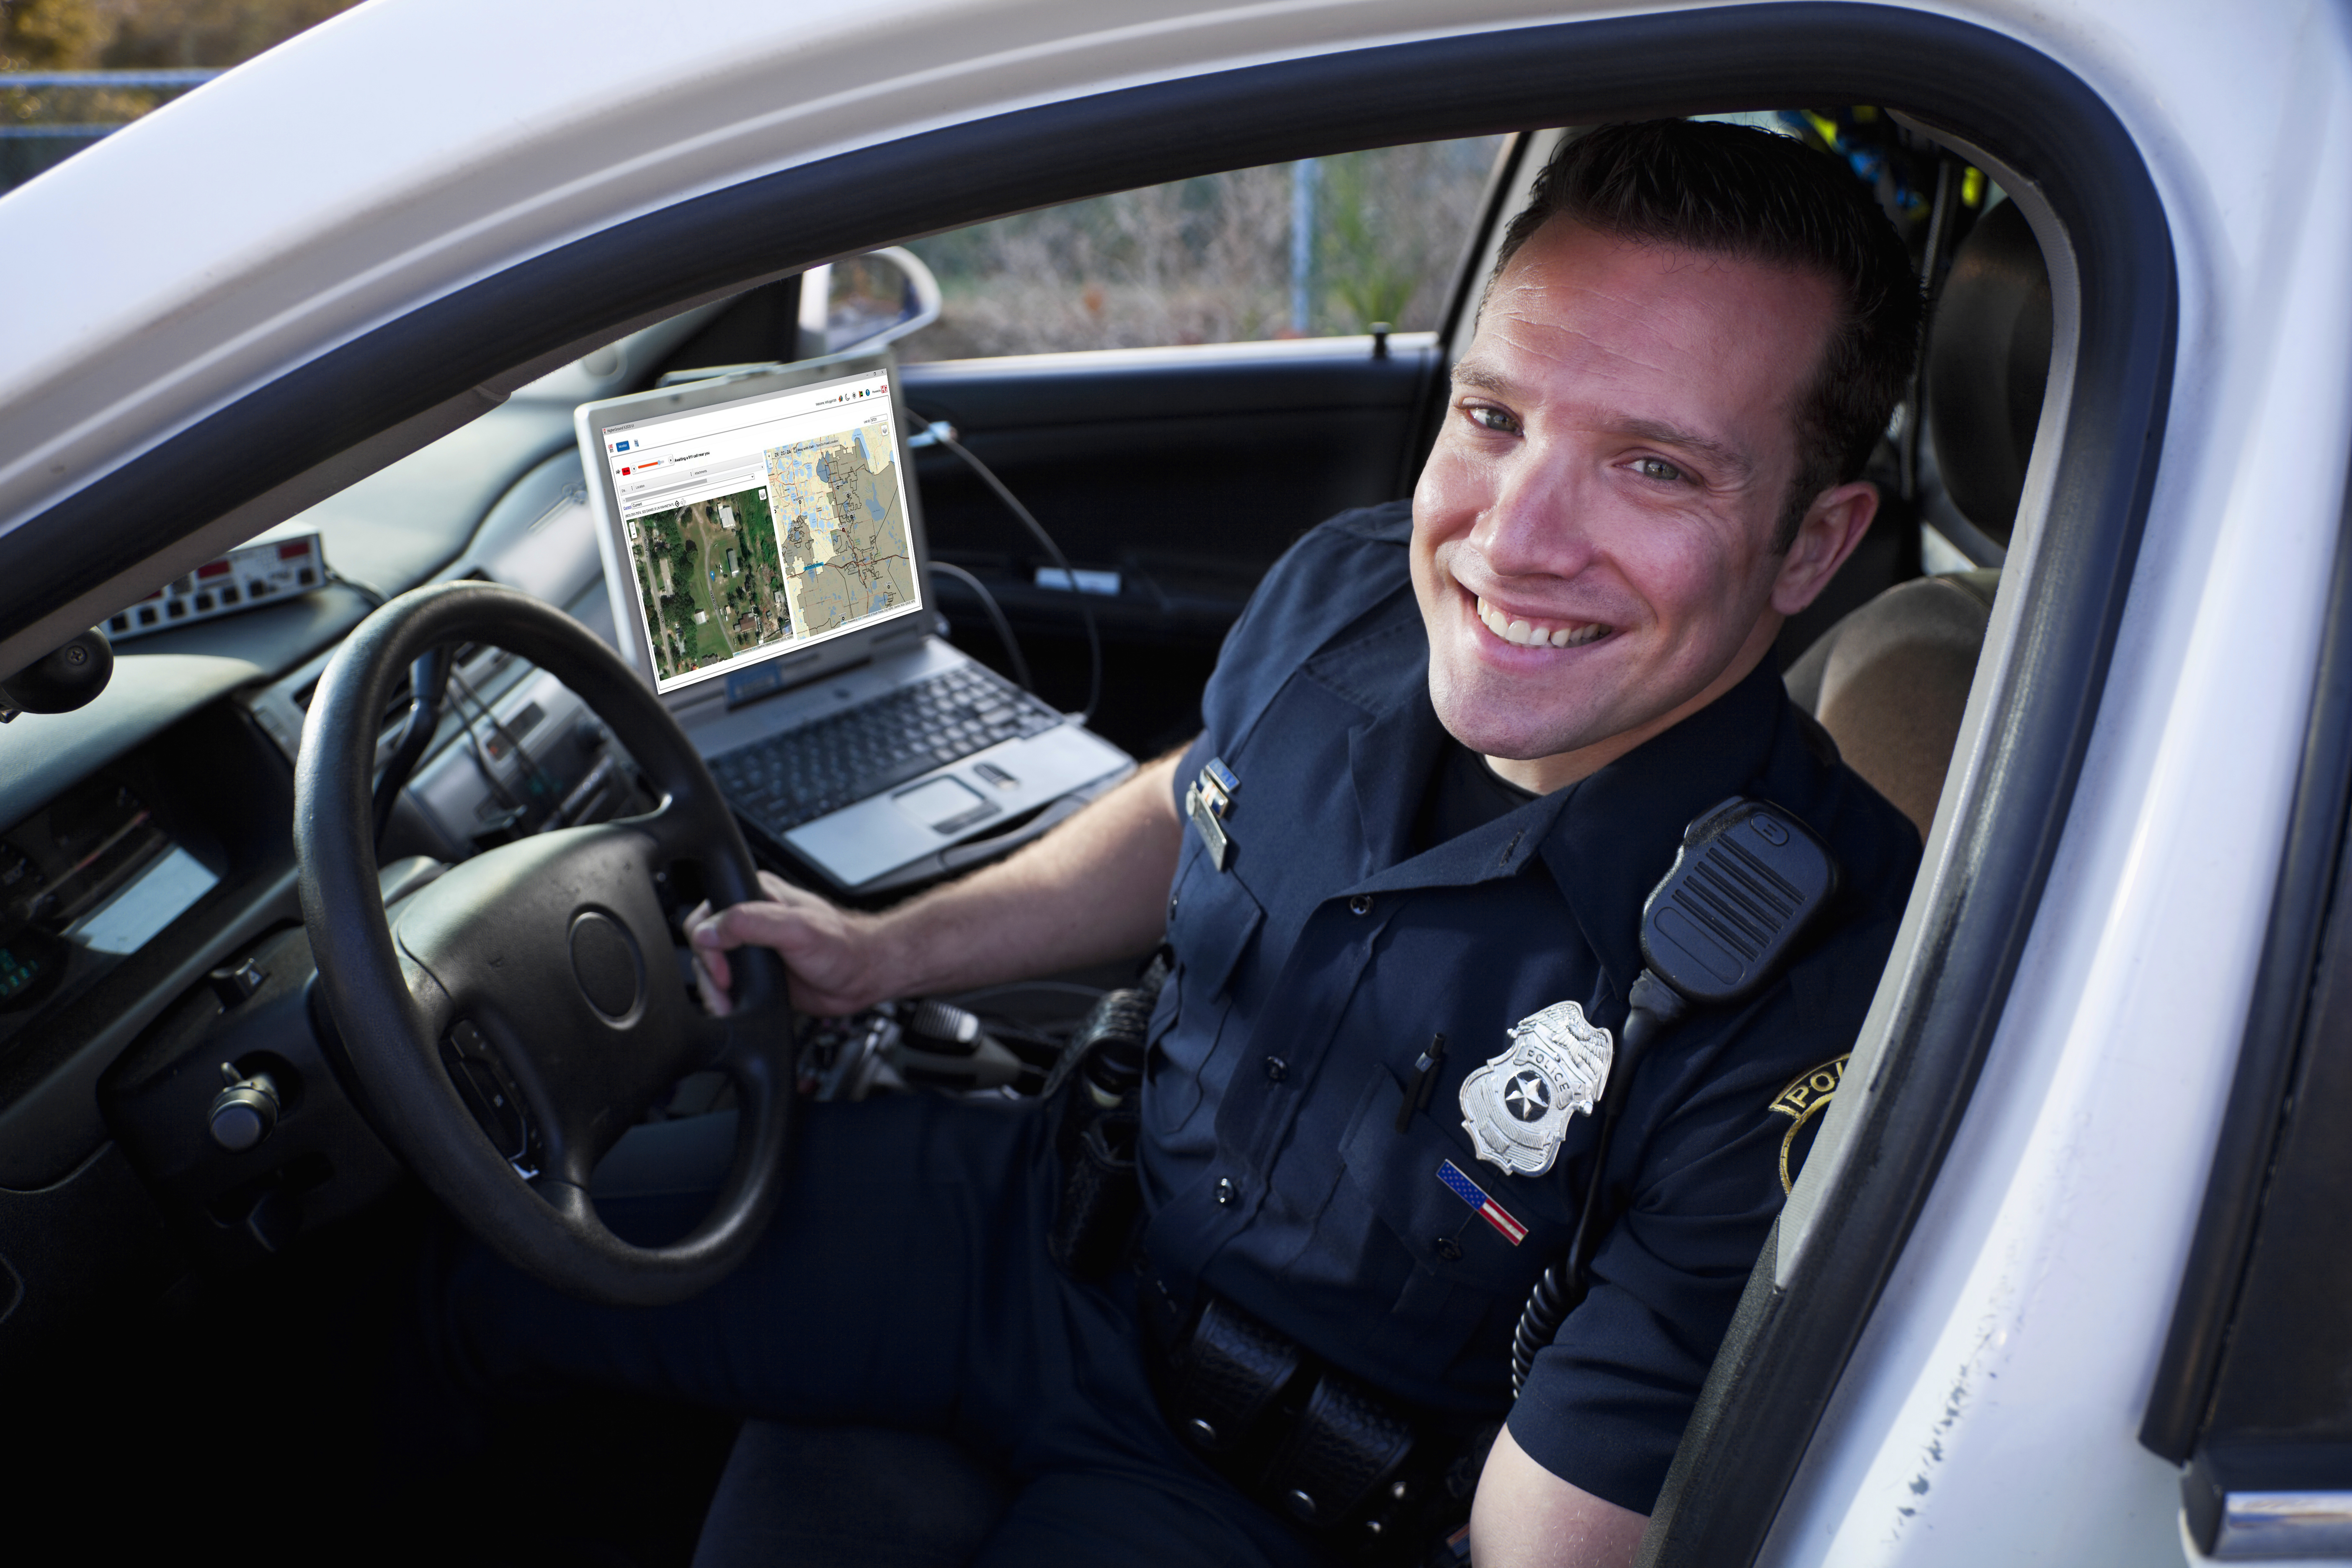 My technology can…  Livestream 911 calls  directly to officers